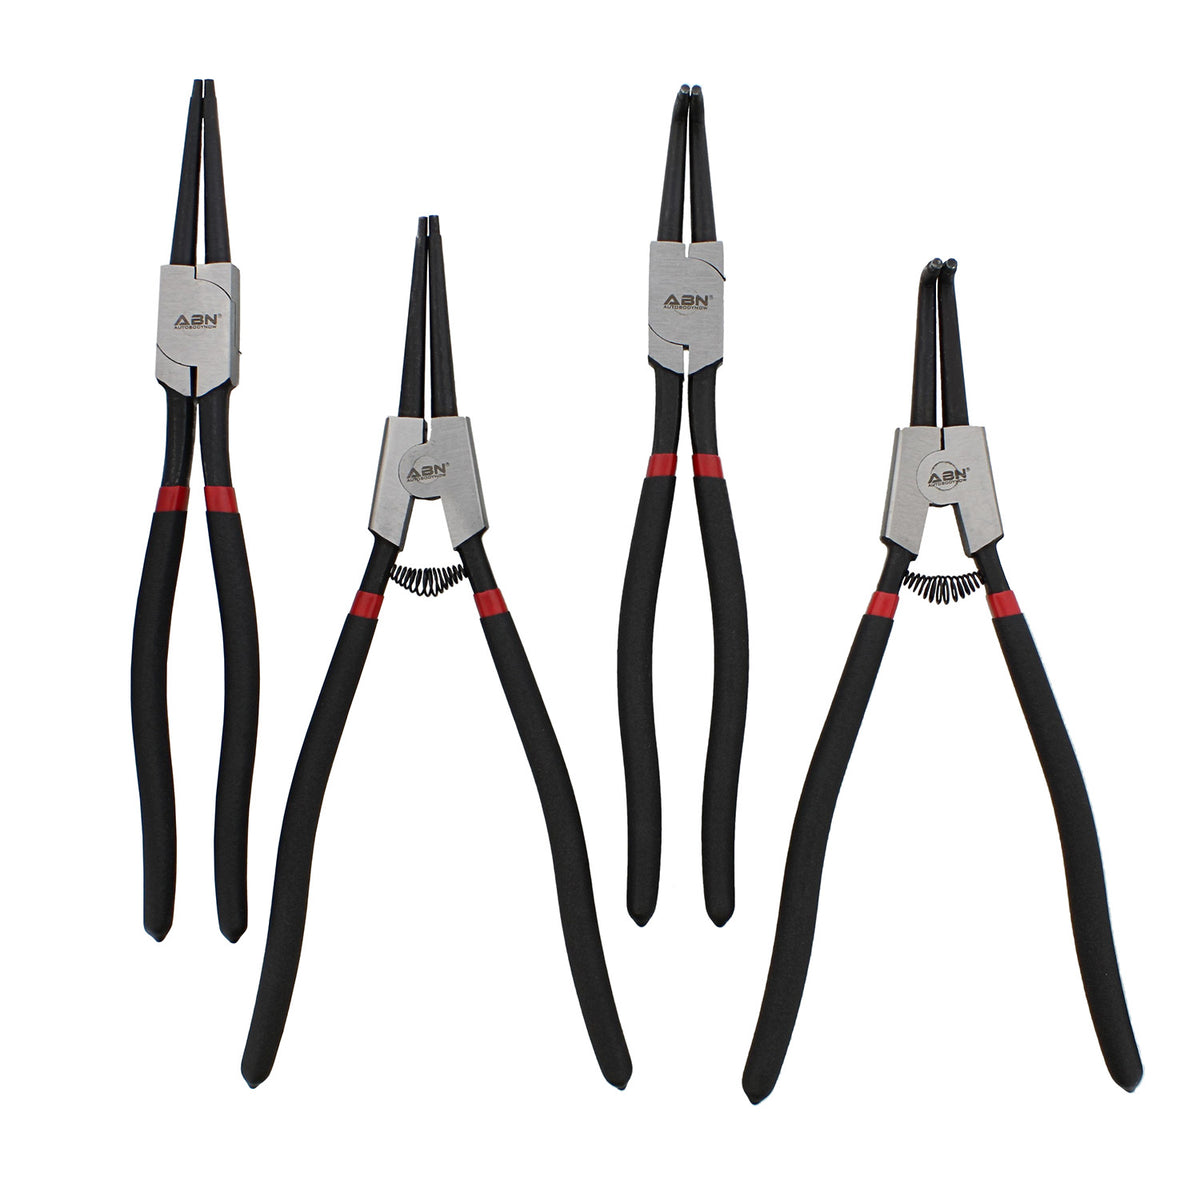 Extra Long Snap Ring Pliers Set - 4pc Lock Ring Pliers with 4mm Tips